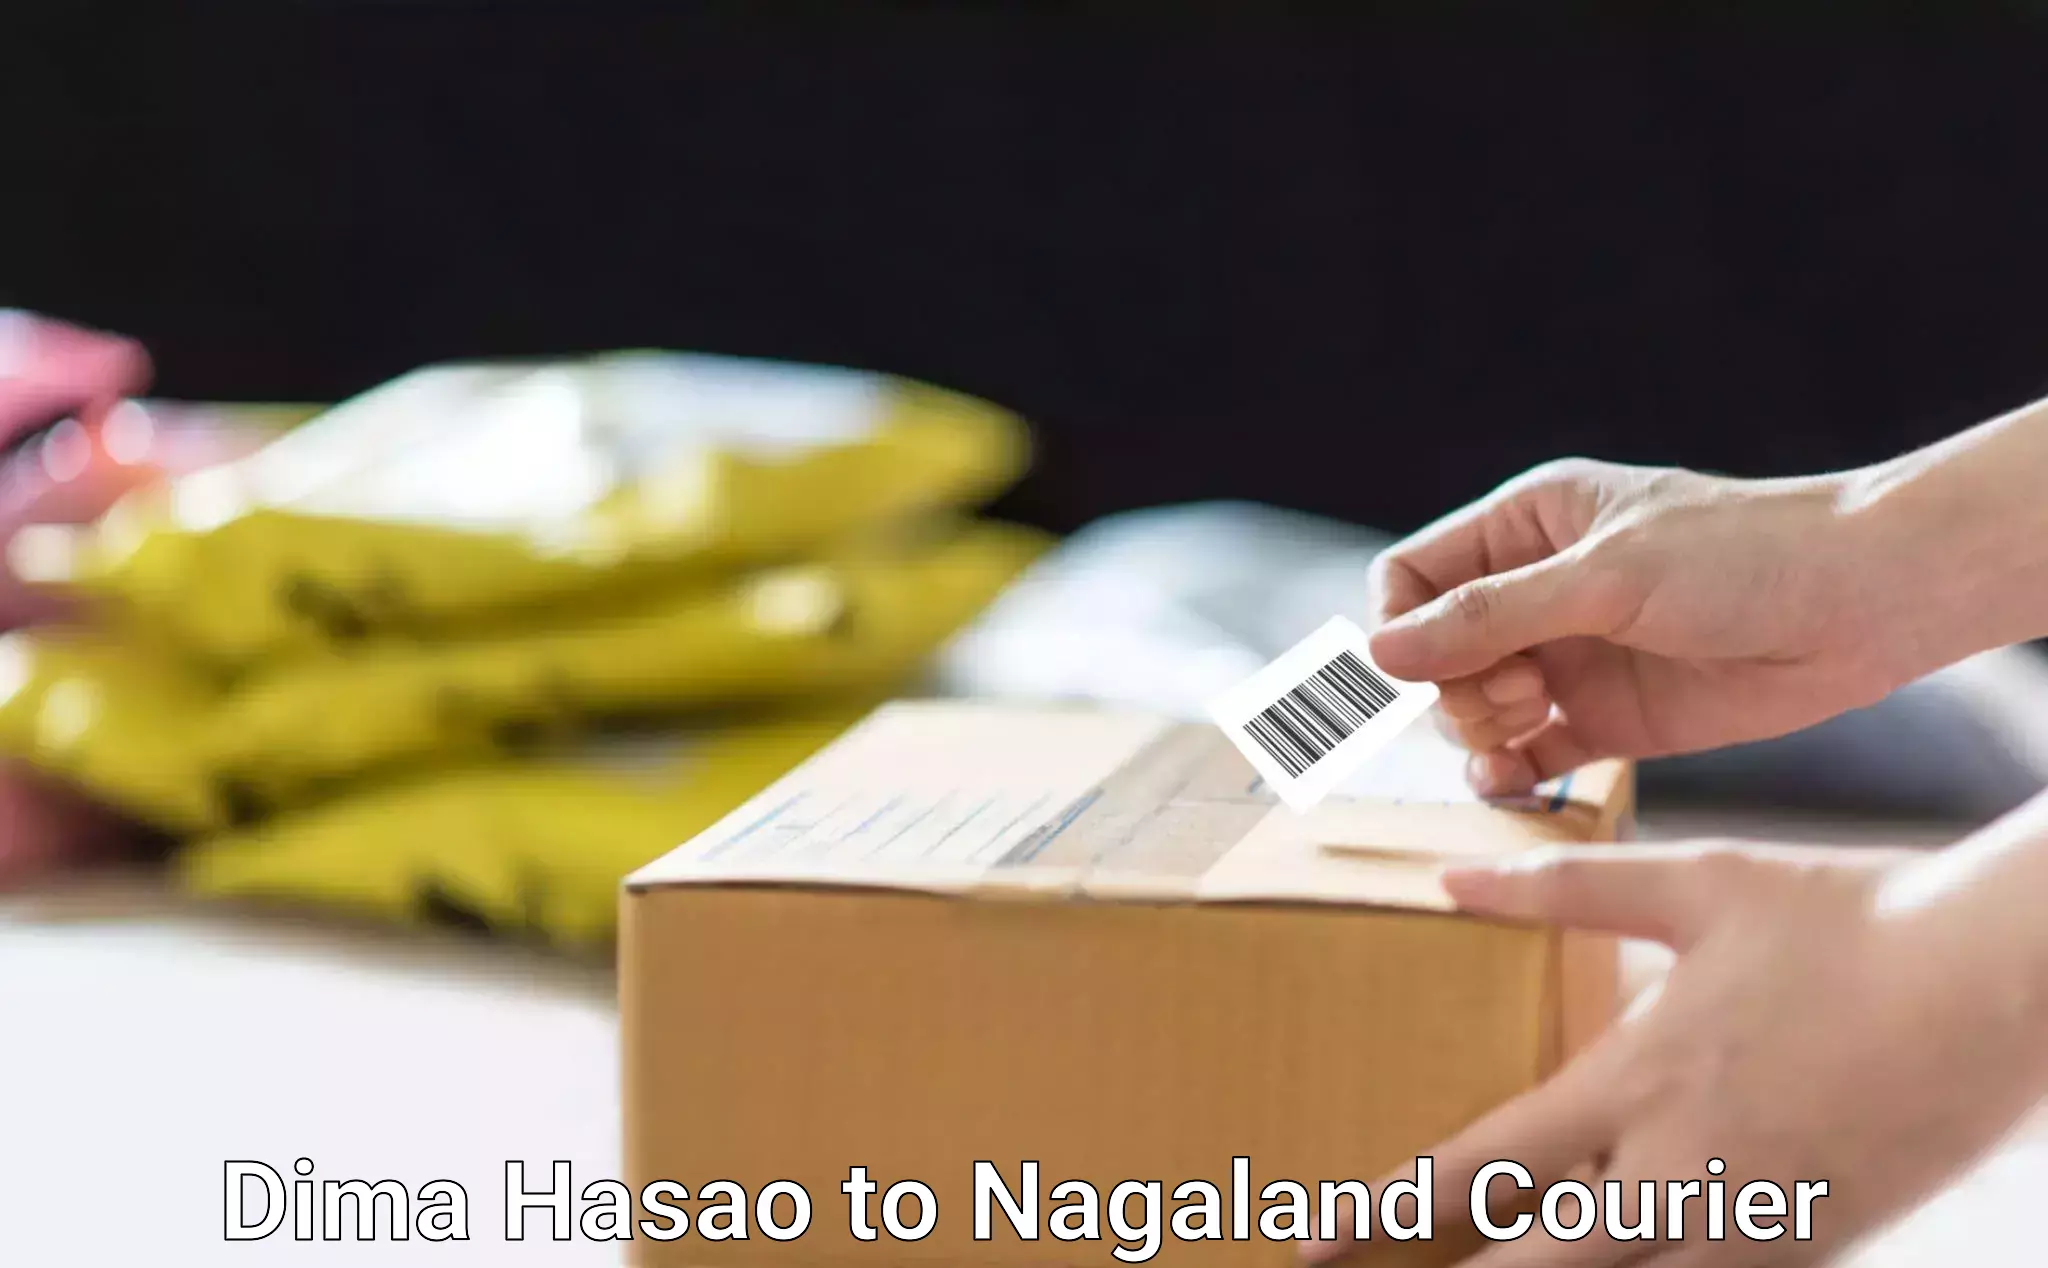 Large-scale shipping solutions Dima Hasao to NIT Nagaland